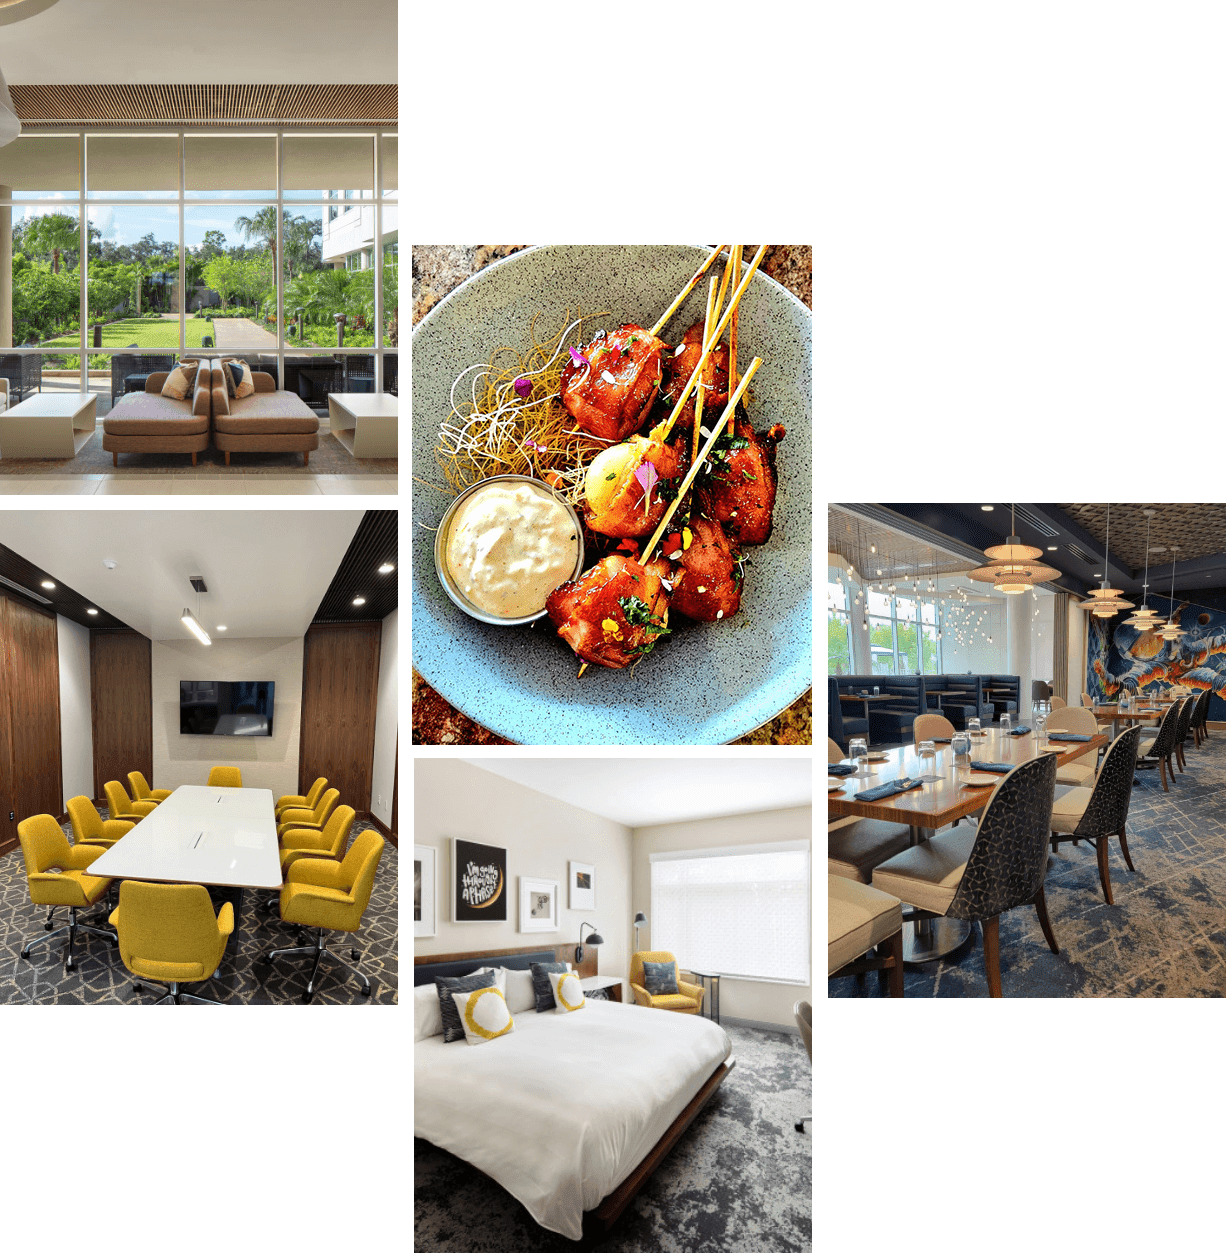 Home page collage of exciting features of the celeste hotel and aurora dining